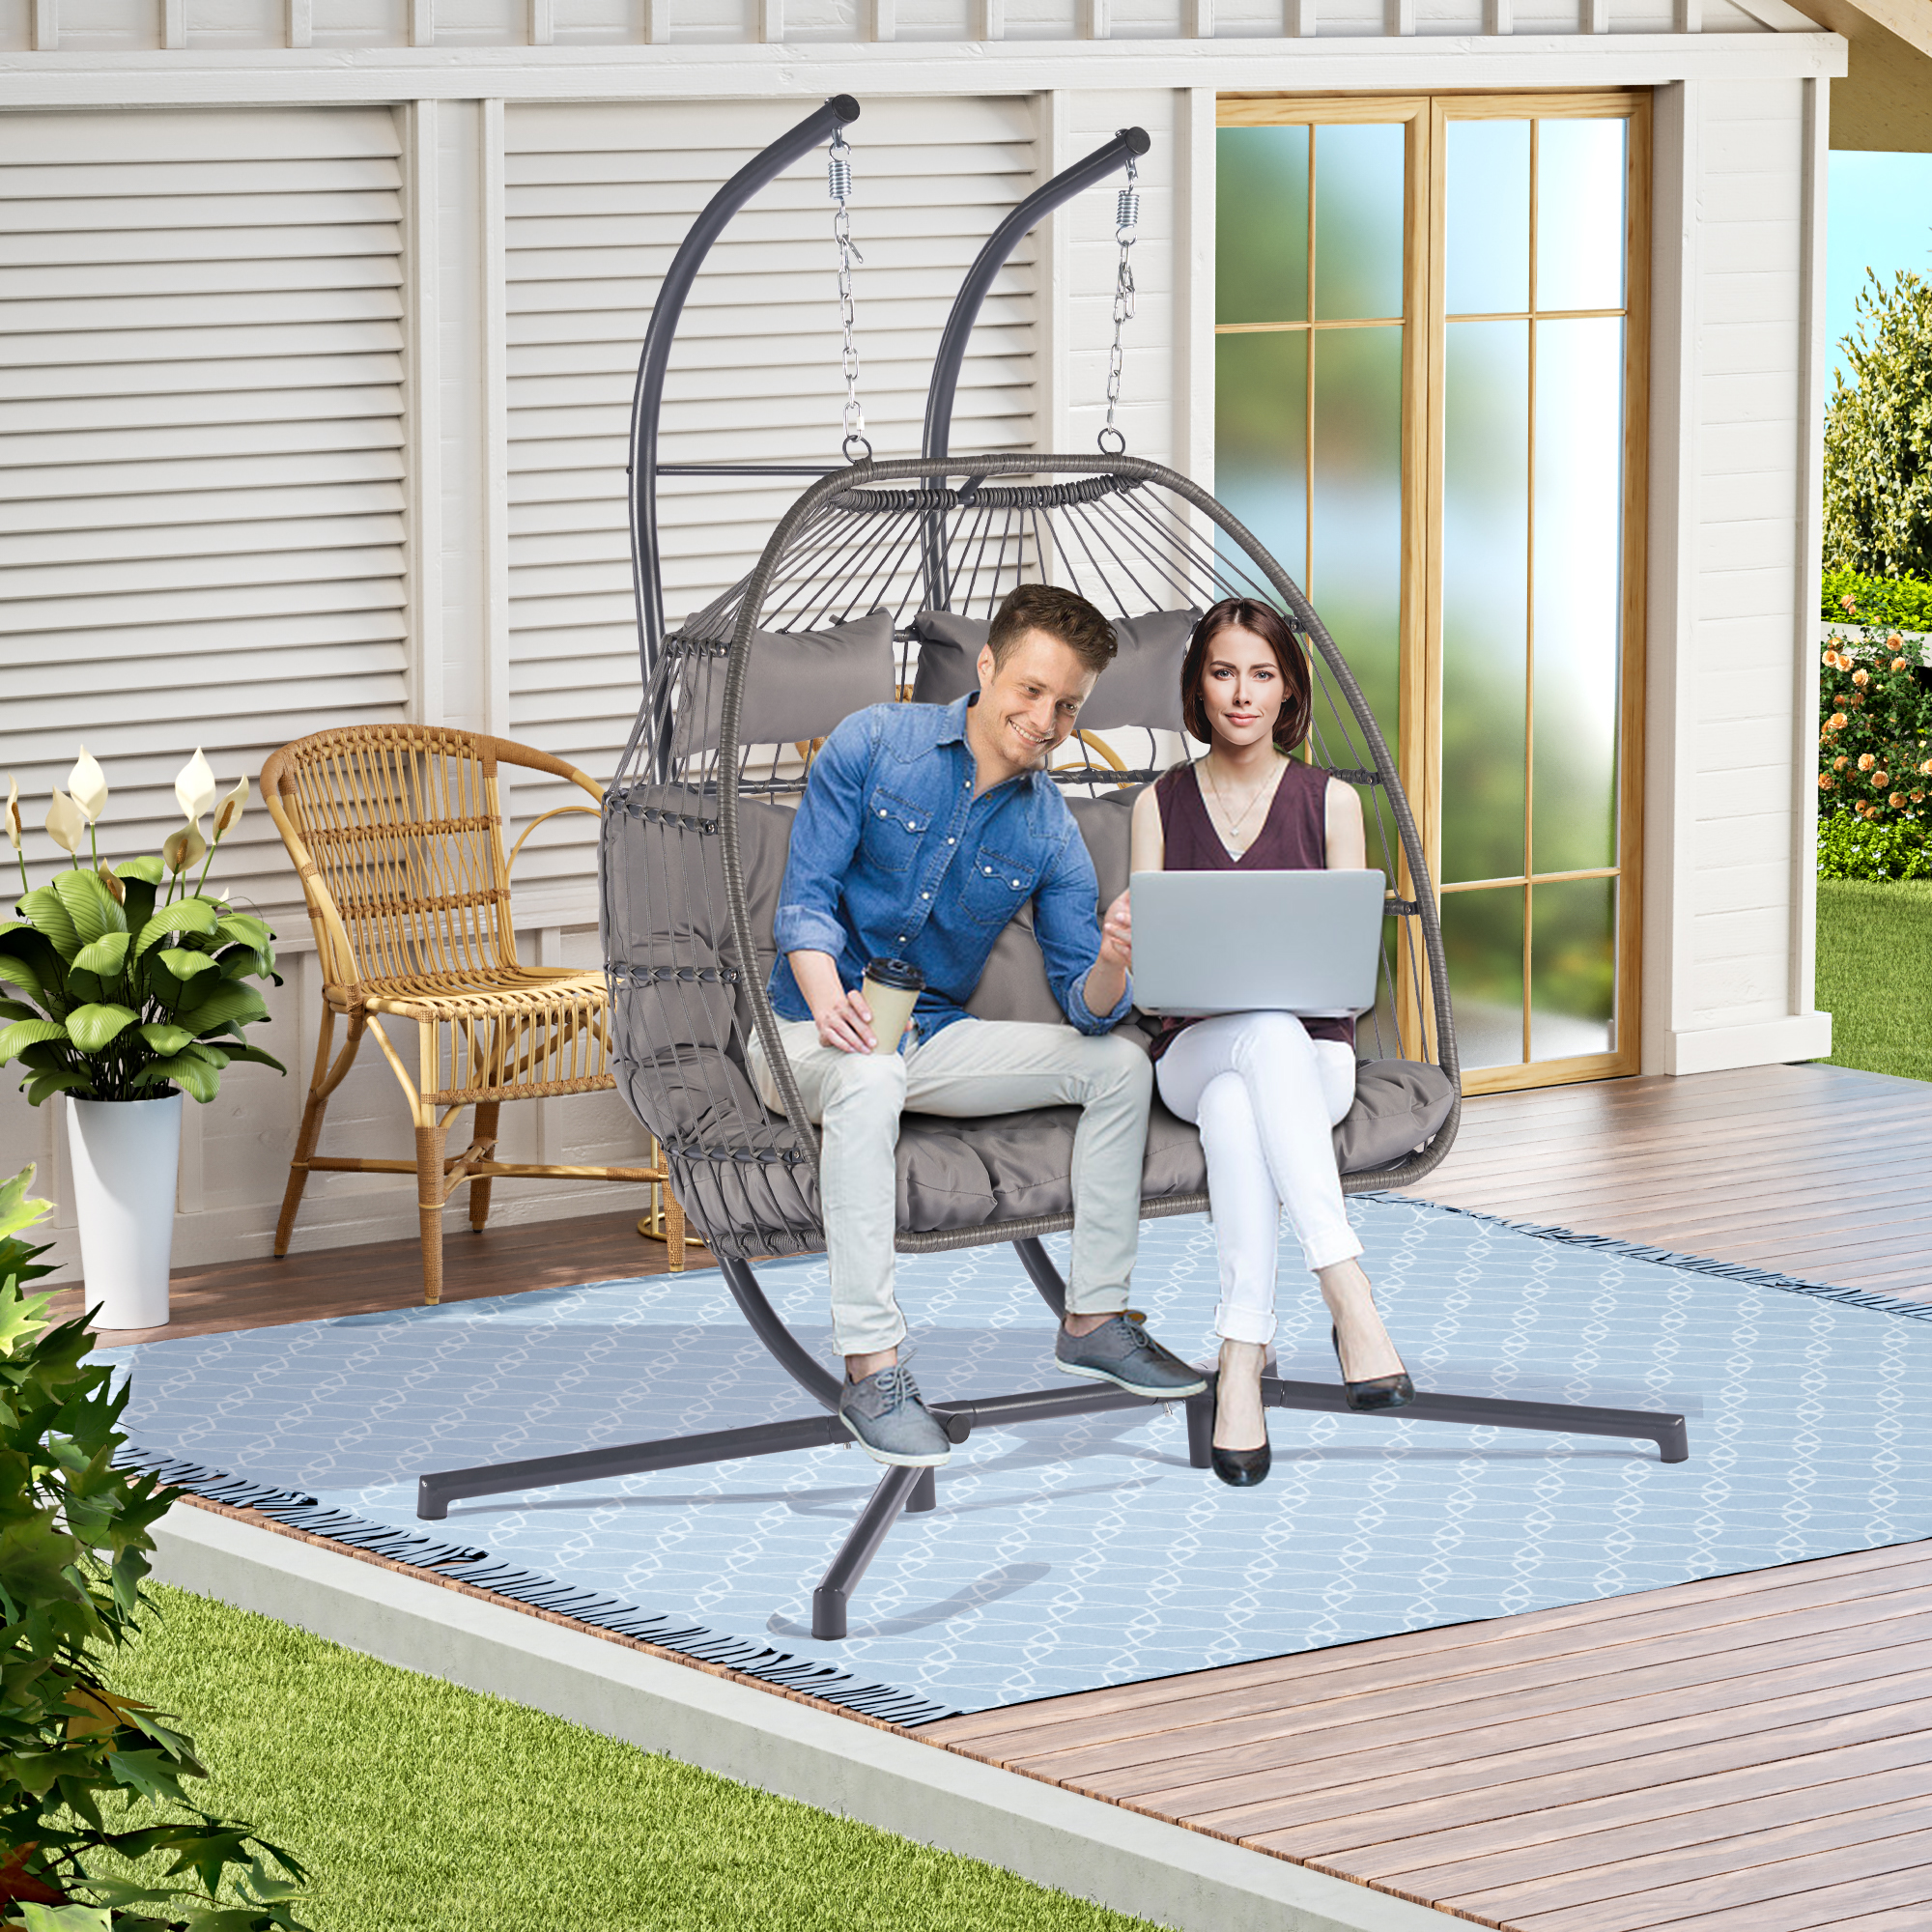 BTMWAY 2 Person Wicker Egg Chair with Stand and Removable Cushion, Outdoor Indoor Swing Hammock Chair Hanging Basket Chair for Patio Balcony Porch Living Room, Light Gray - image 1 of 9